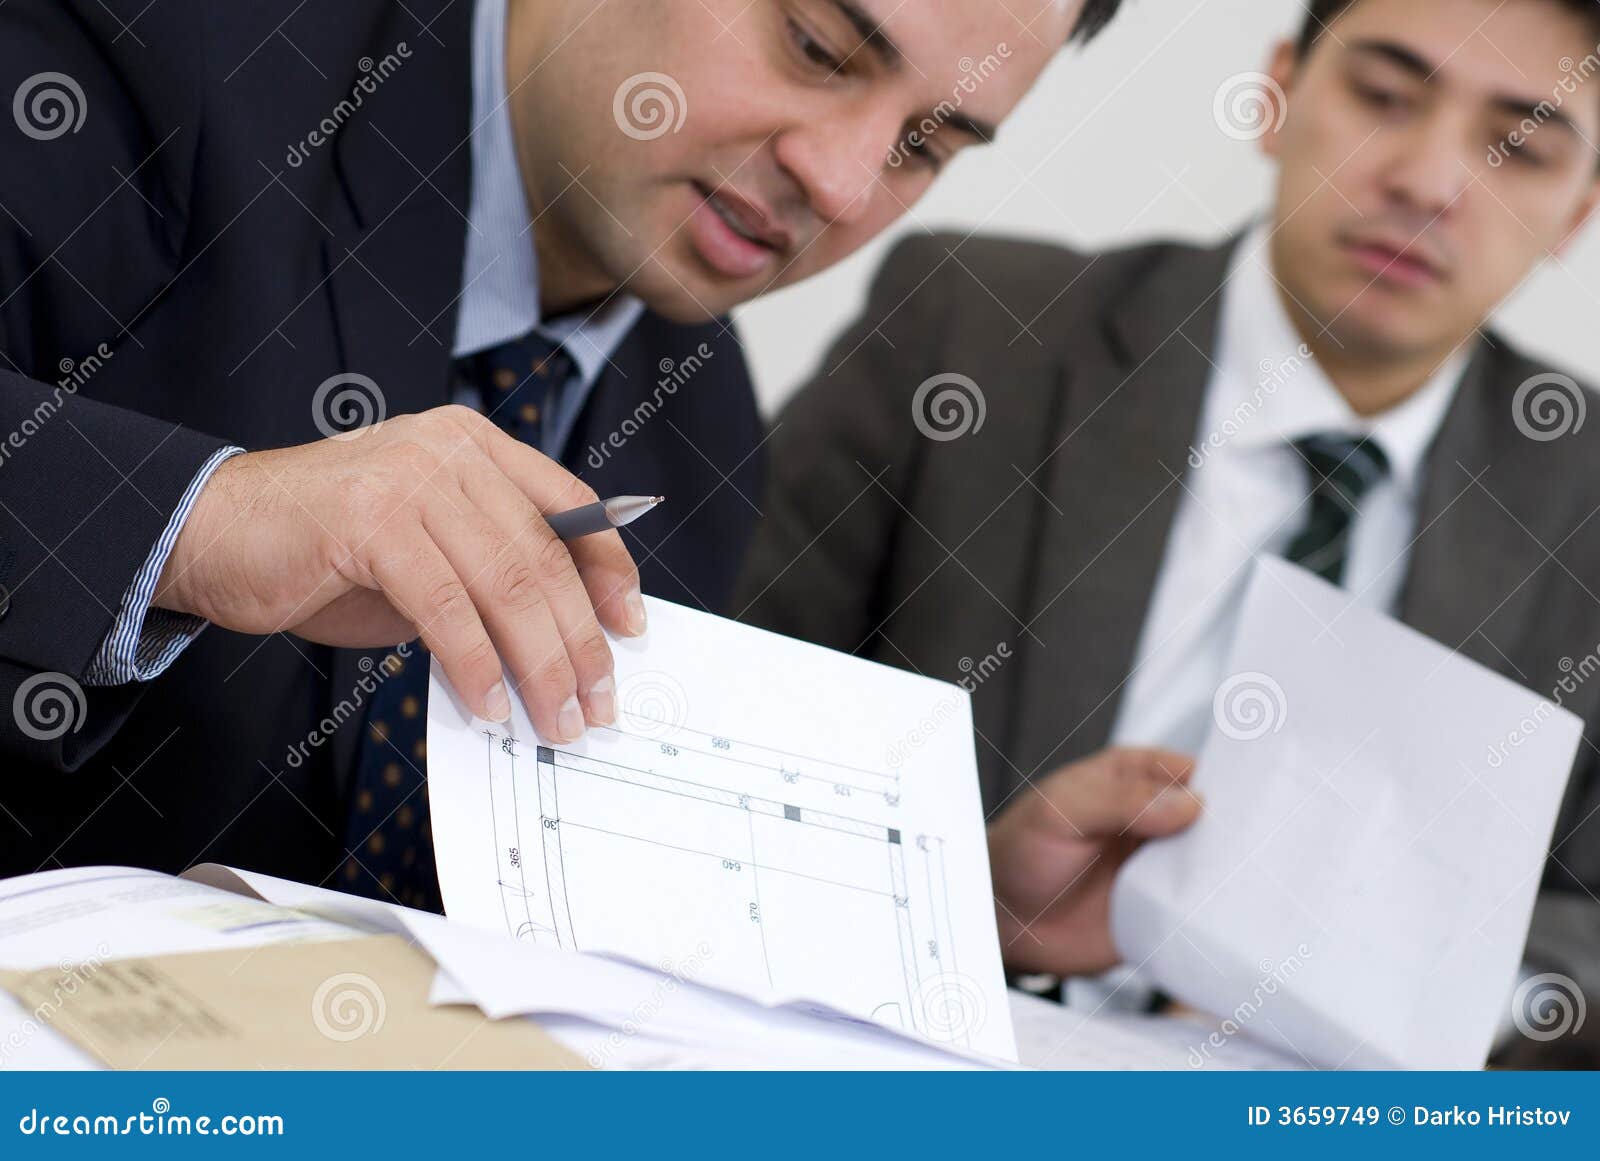 bissines-meeting-documents-stock-image-image-of-interactive-3659749